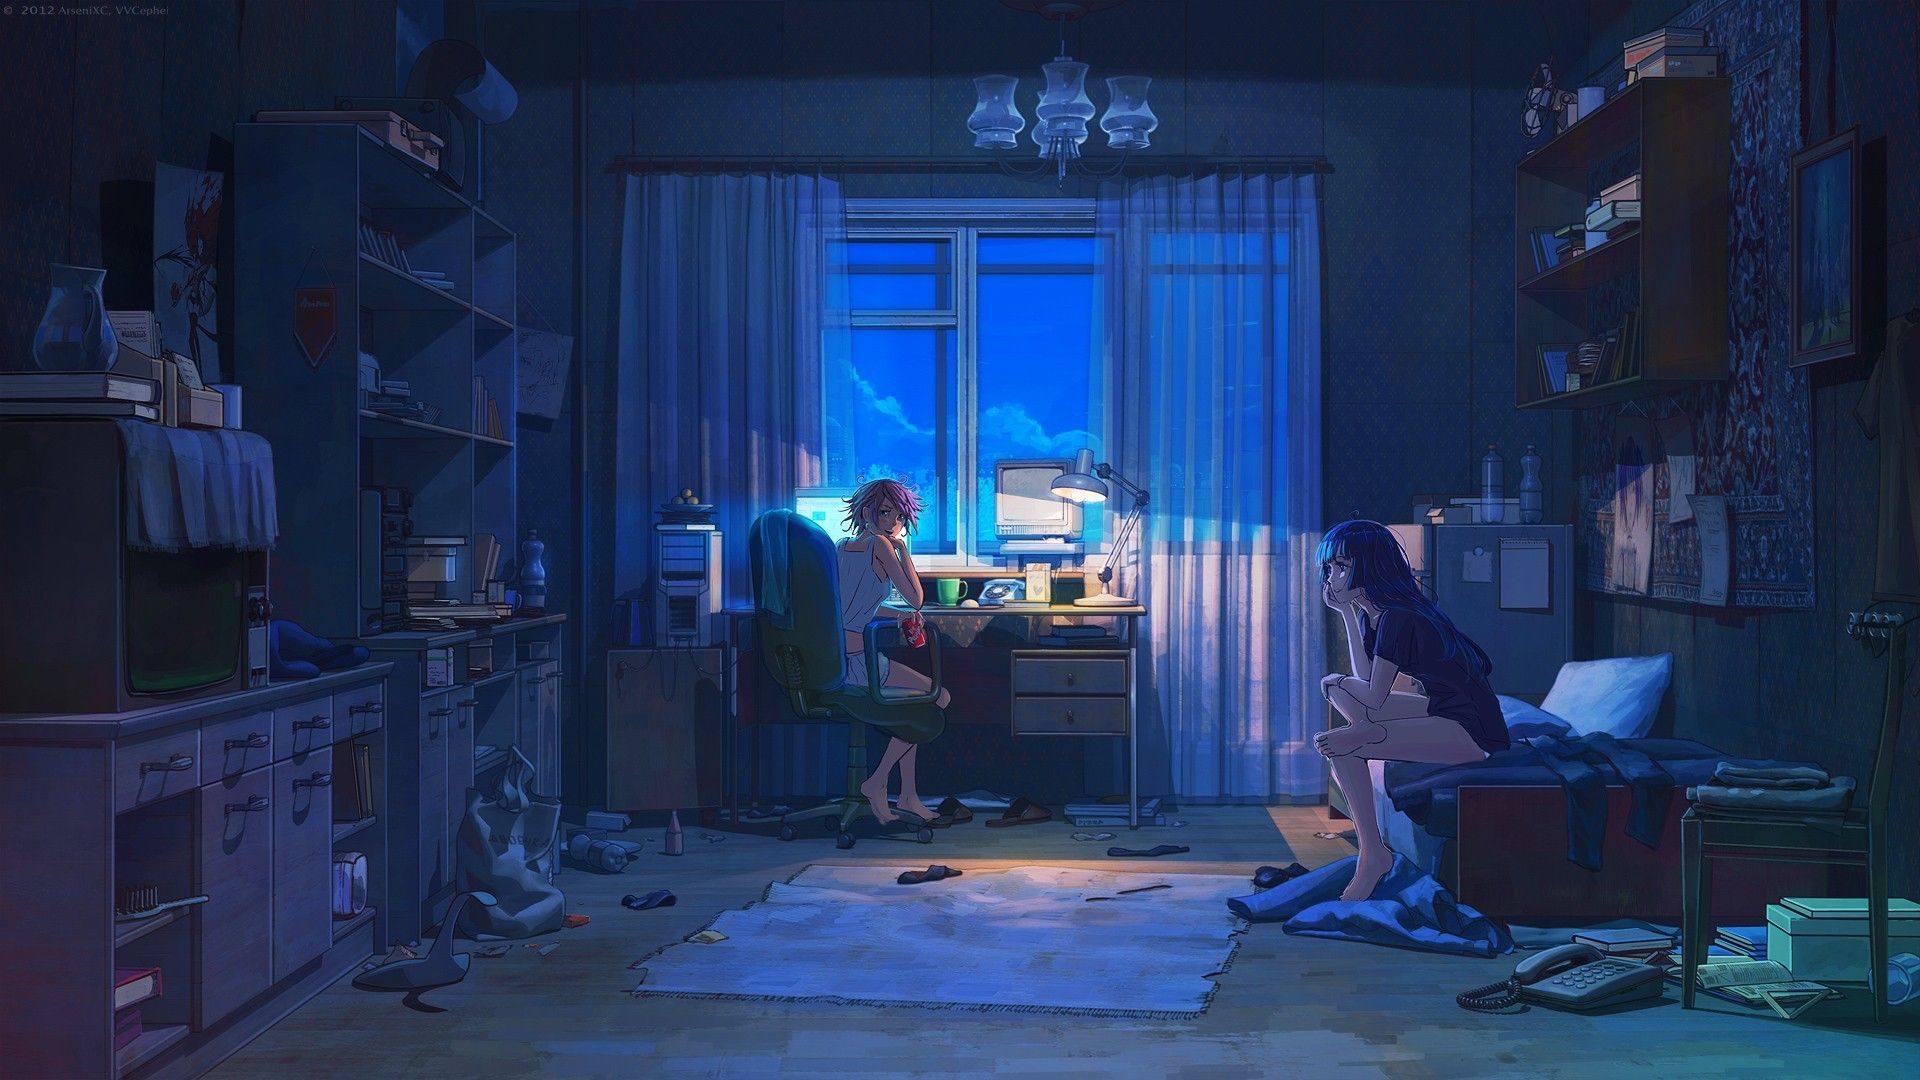 Download Enjoy a summer night in this cozy, anime-themed bedroom! |  Wallpapers.com